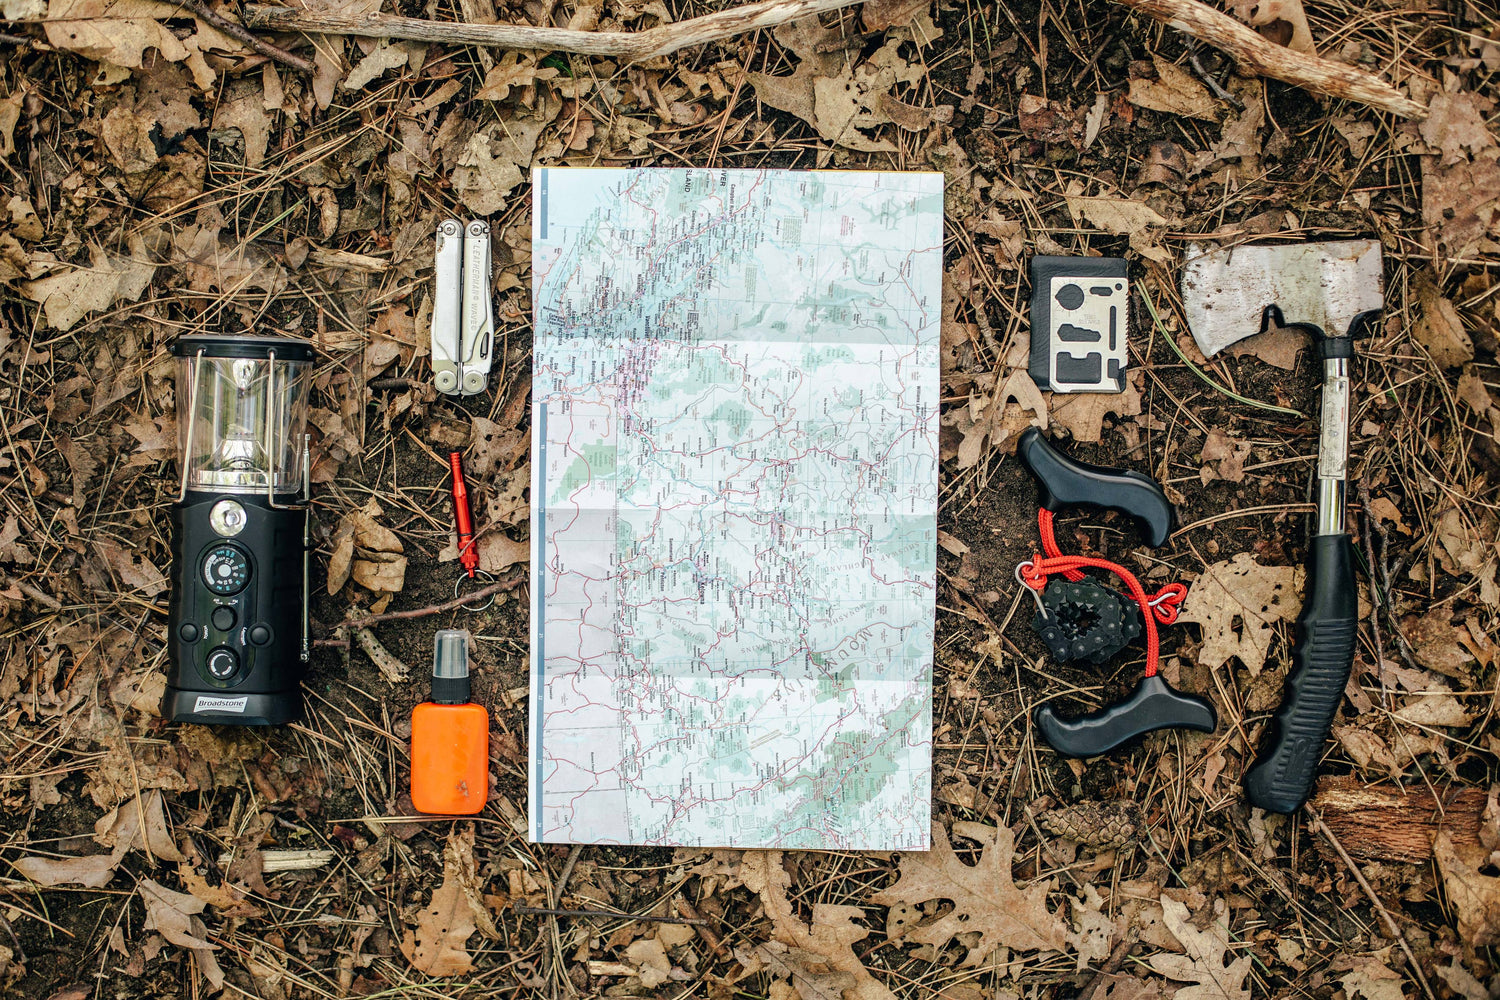 Hiking gear and trail maps